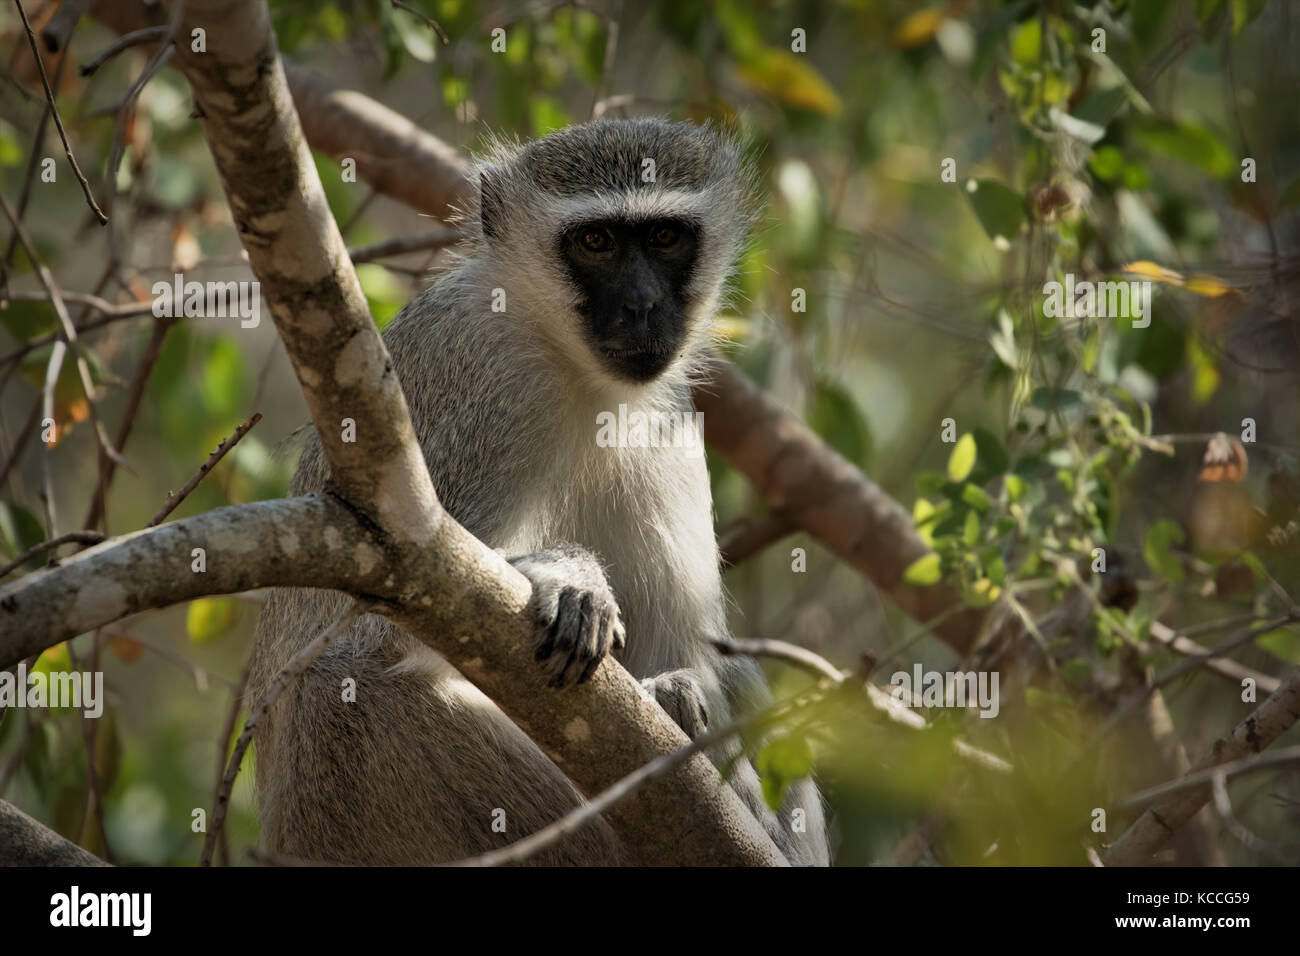 Vervet monkey (Cercopithecus aethiops) sitting in a tree, South Africa Stock Photo